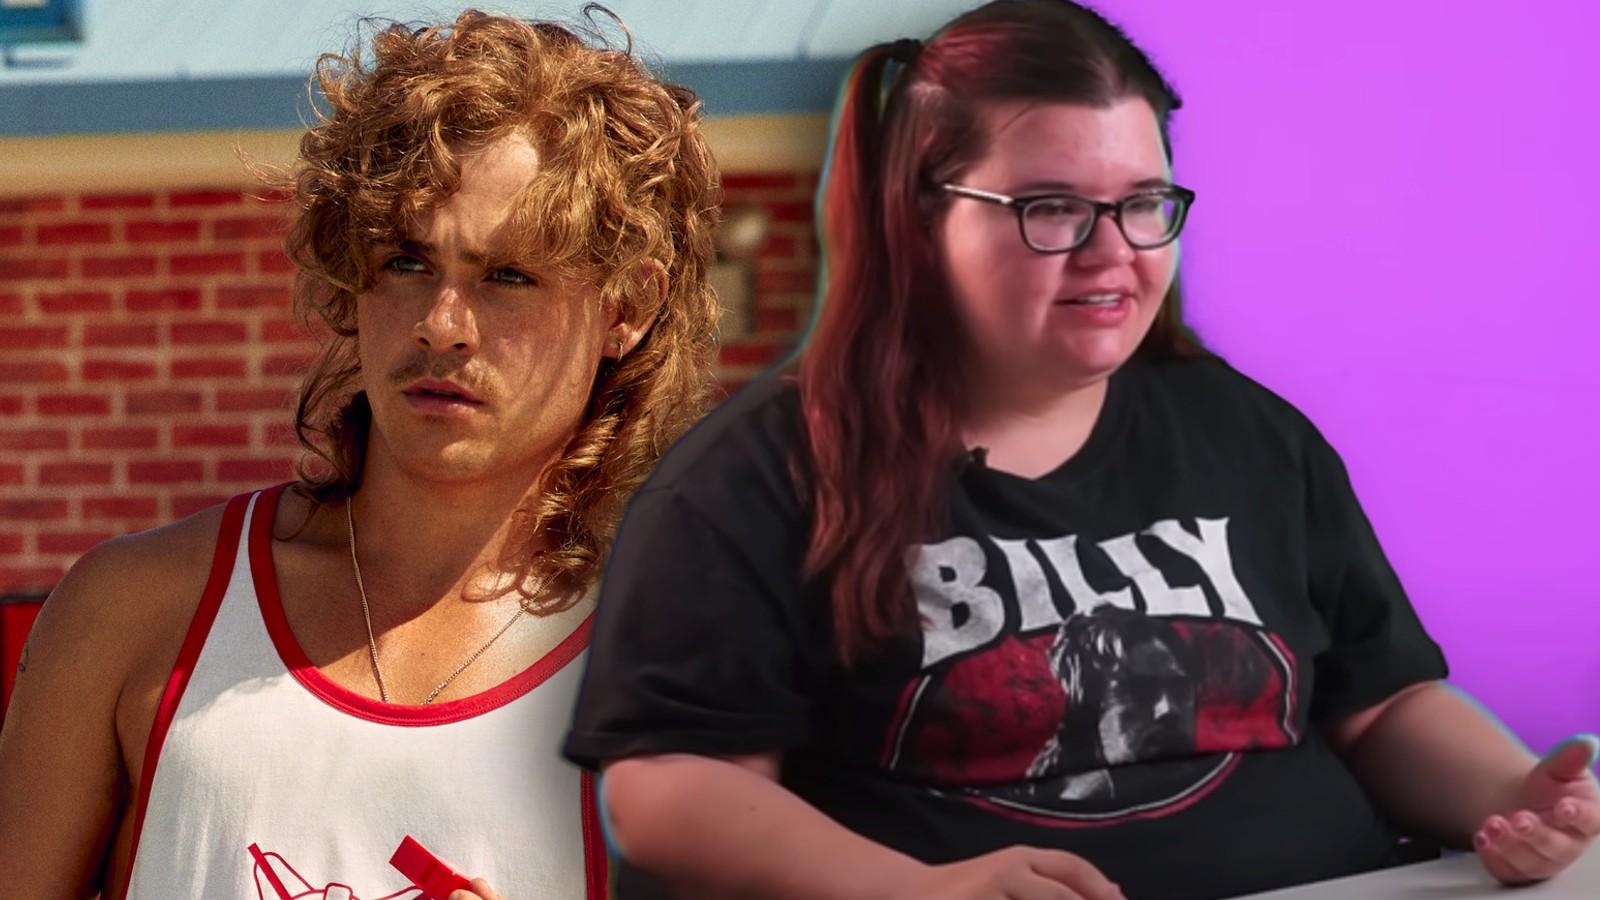 Stranger Things fan lost $10k after being catfished by Dacre Montgomery scammer - Dexerto